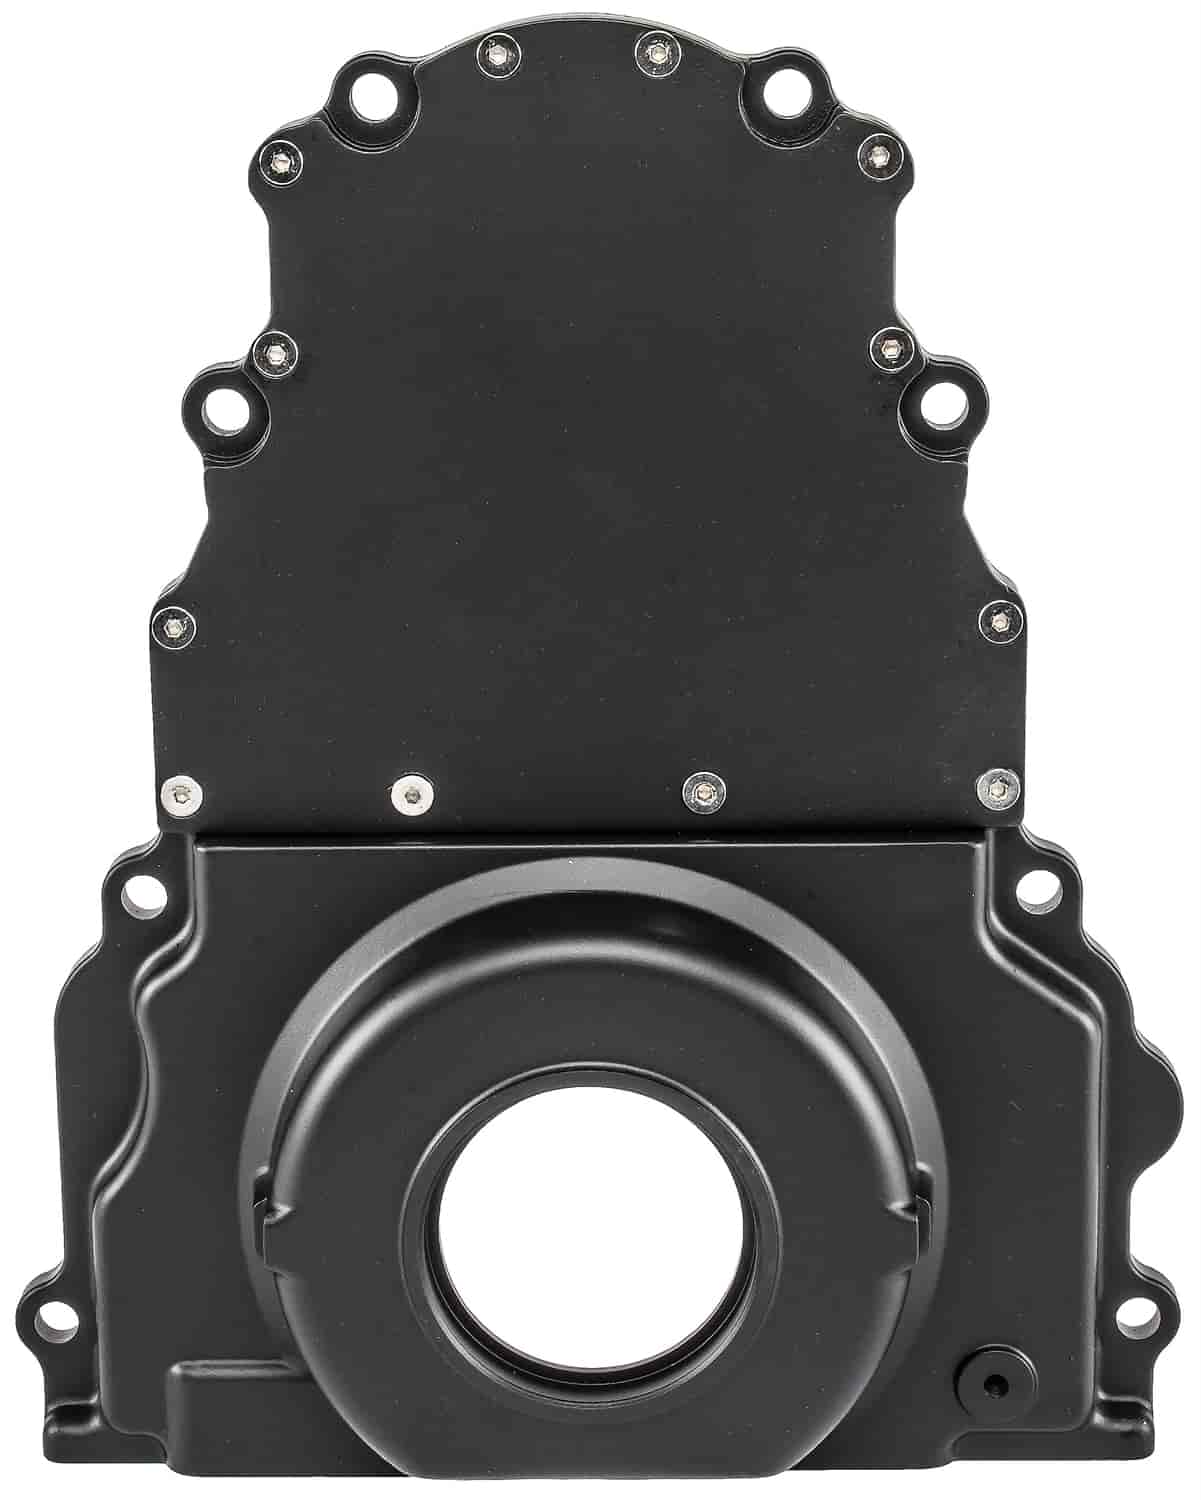 GM LS Timing Cover for GM LS Engines up to Gen IV with Rear Mounted Cam Sensors